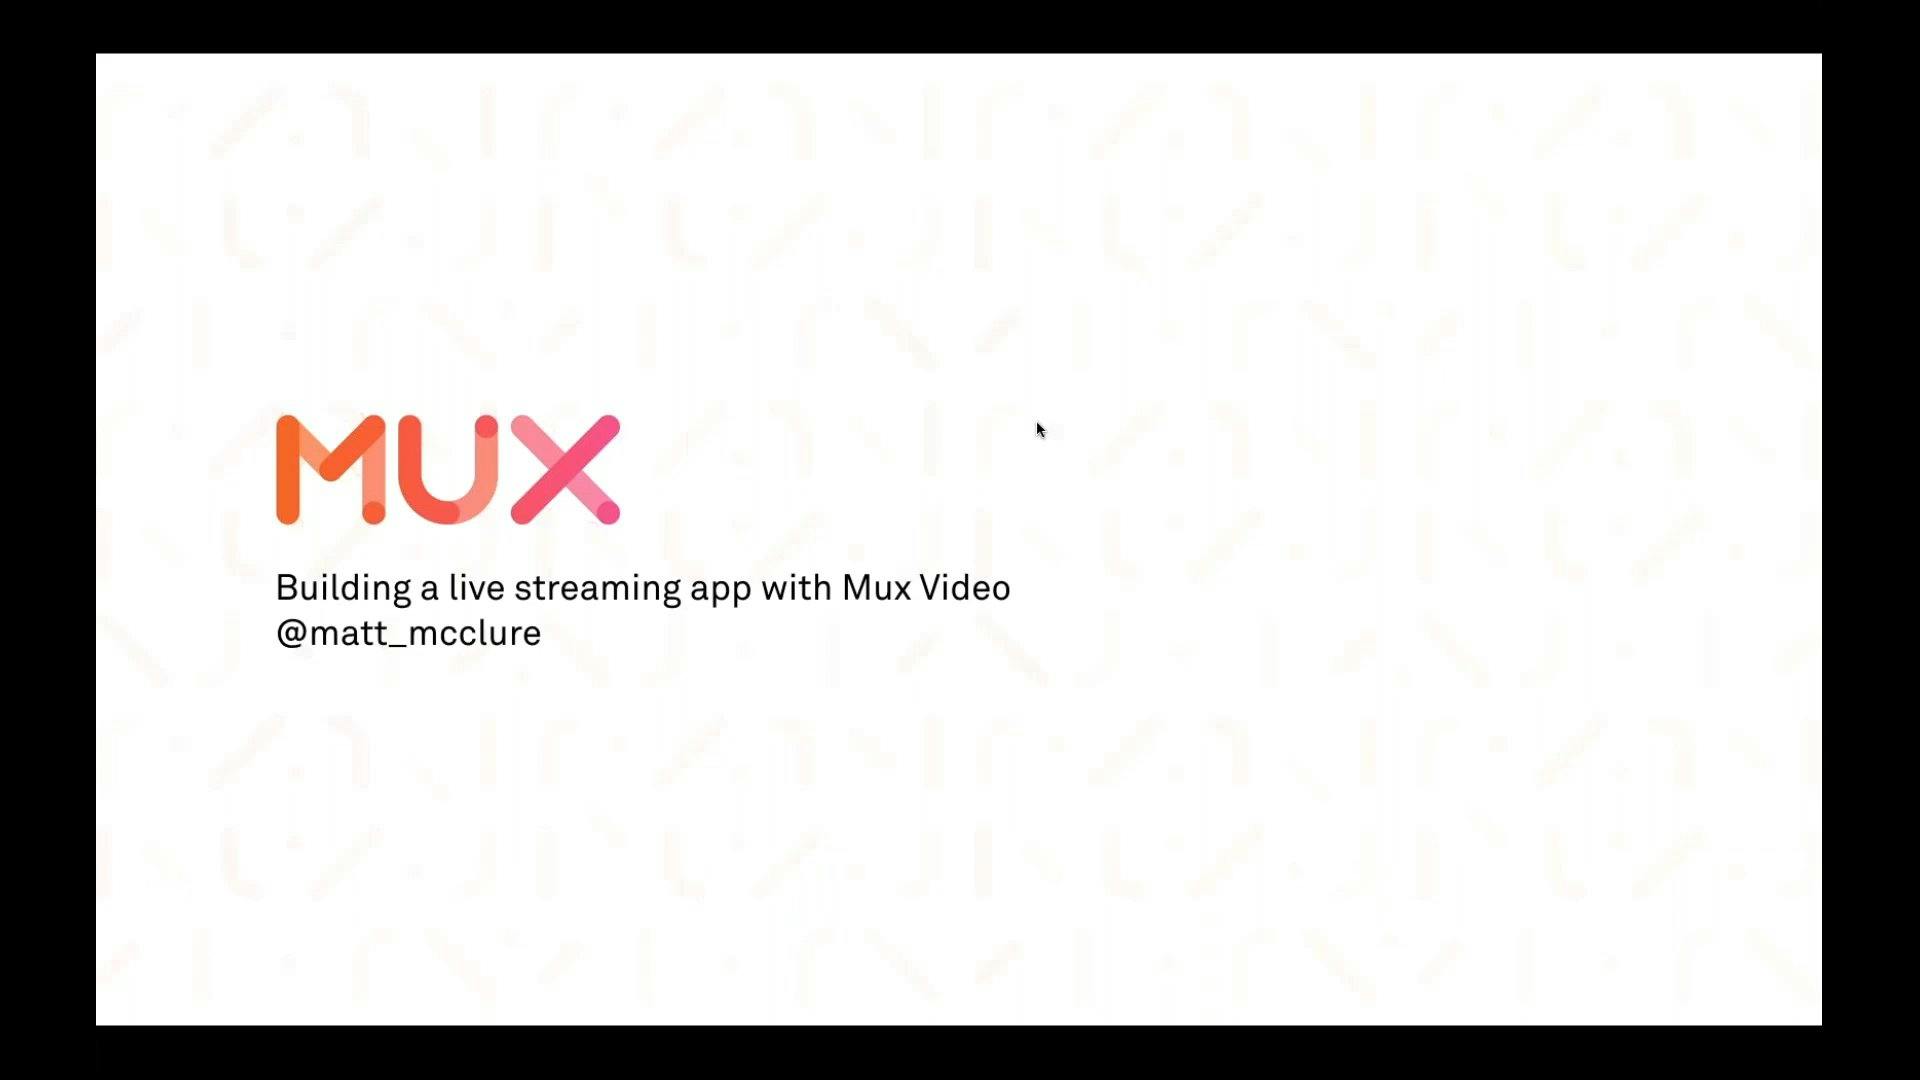 Webinar: How to build a live streaming app with Mux Video